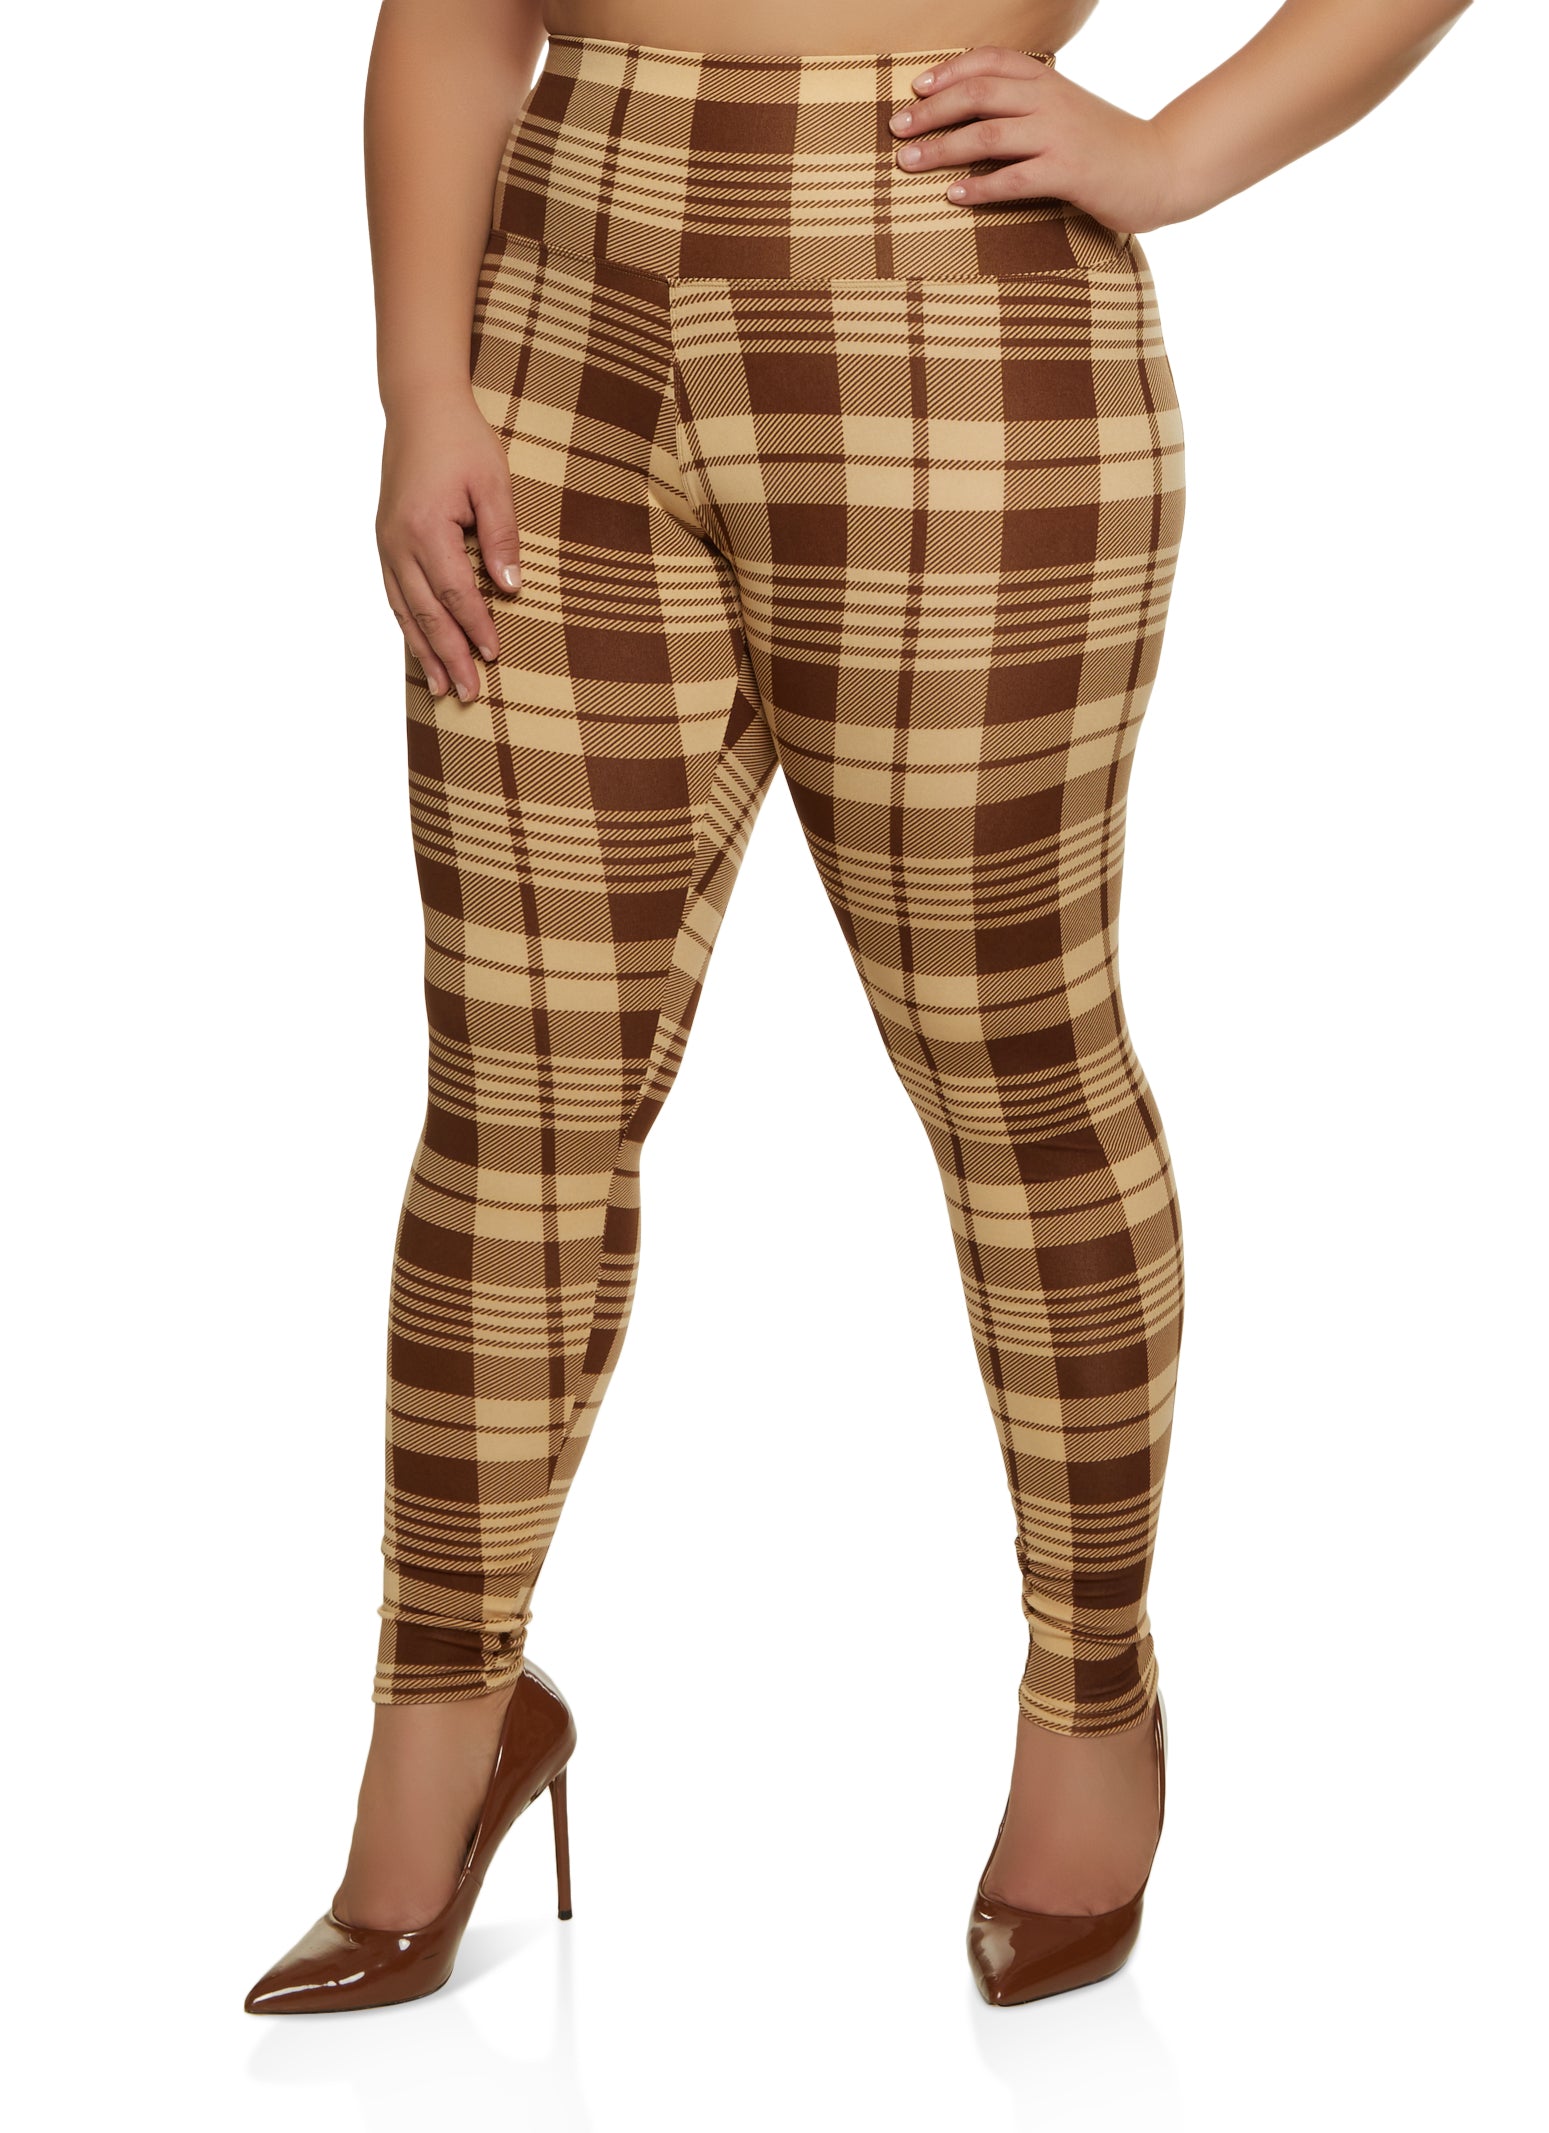 Plus Size Brown Leggings. Face Swap. Insert Your Face ID:1675818